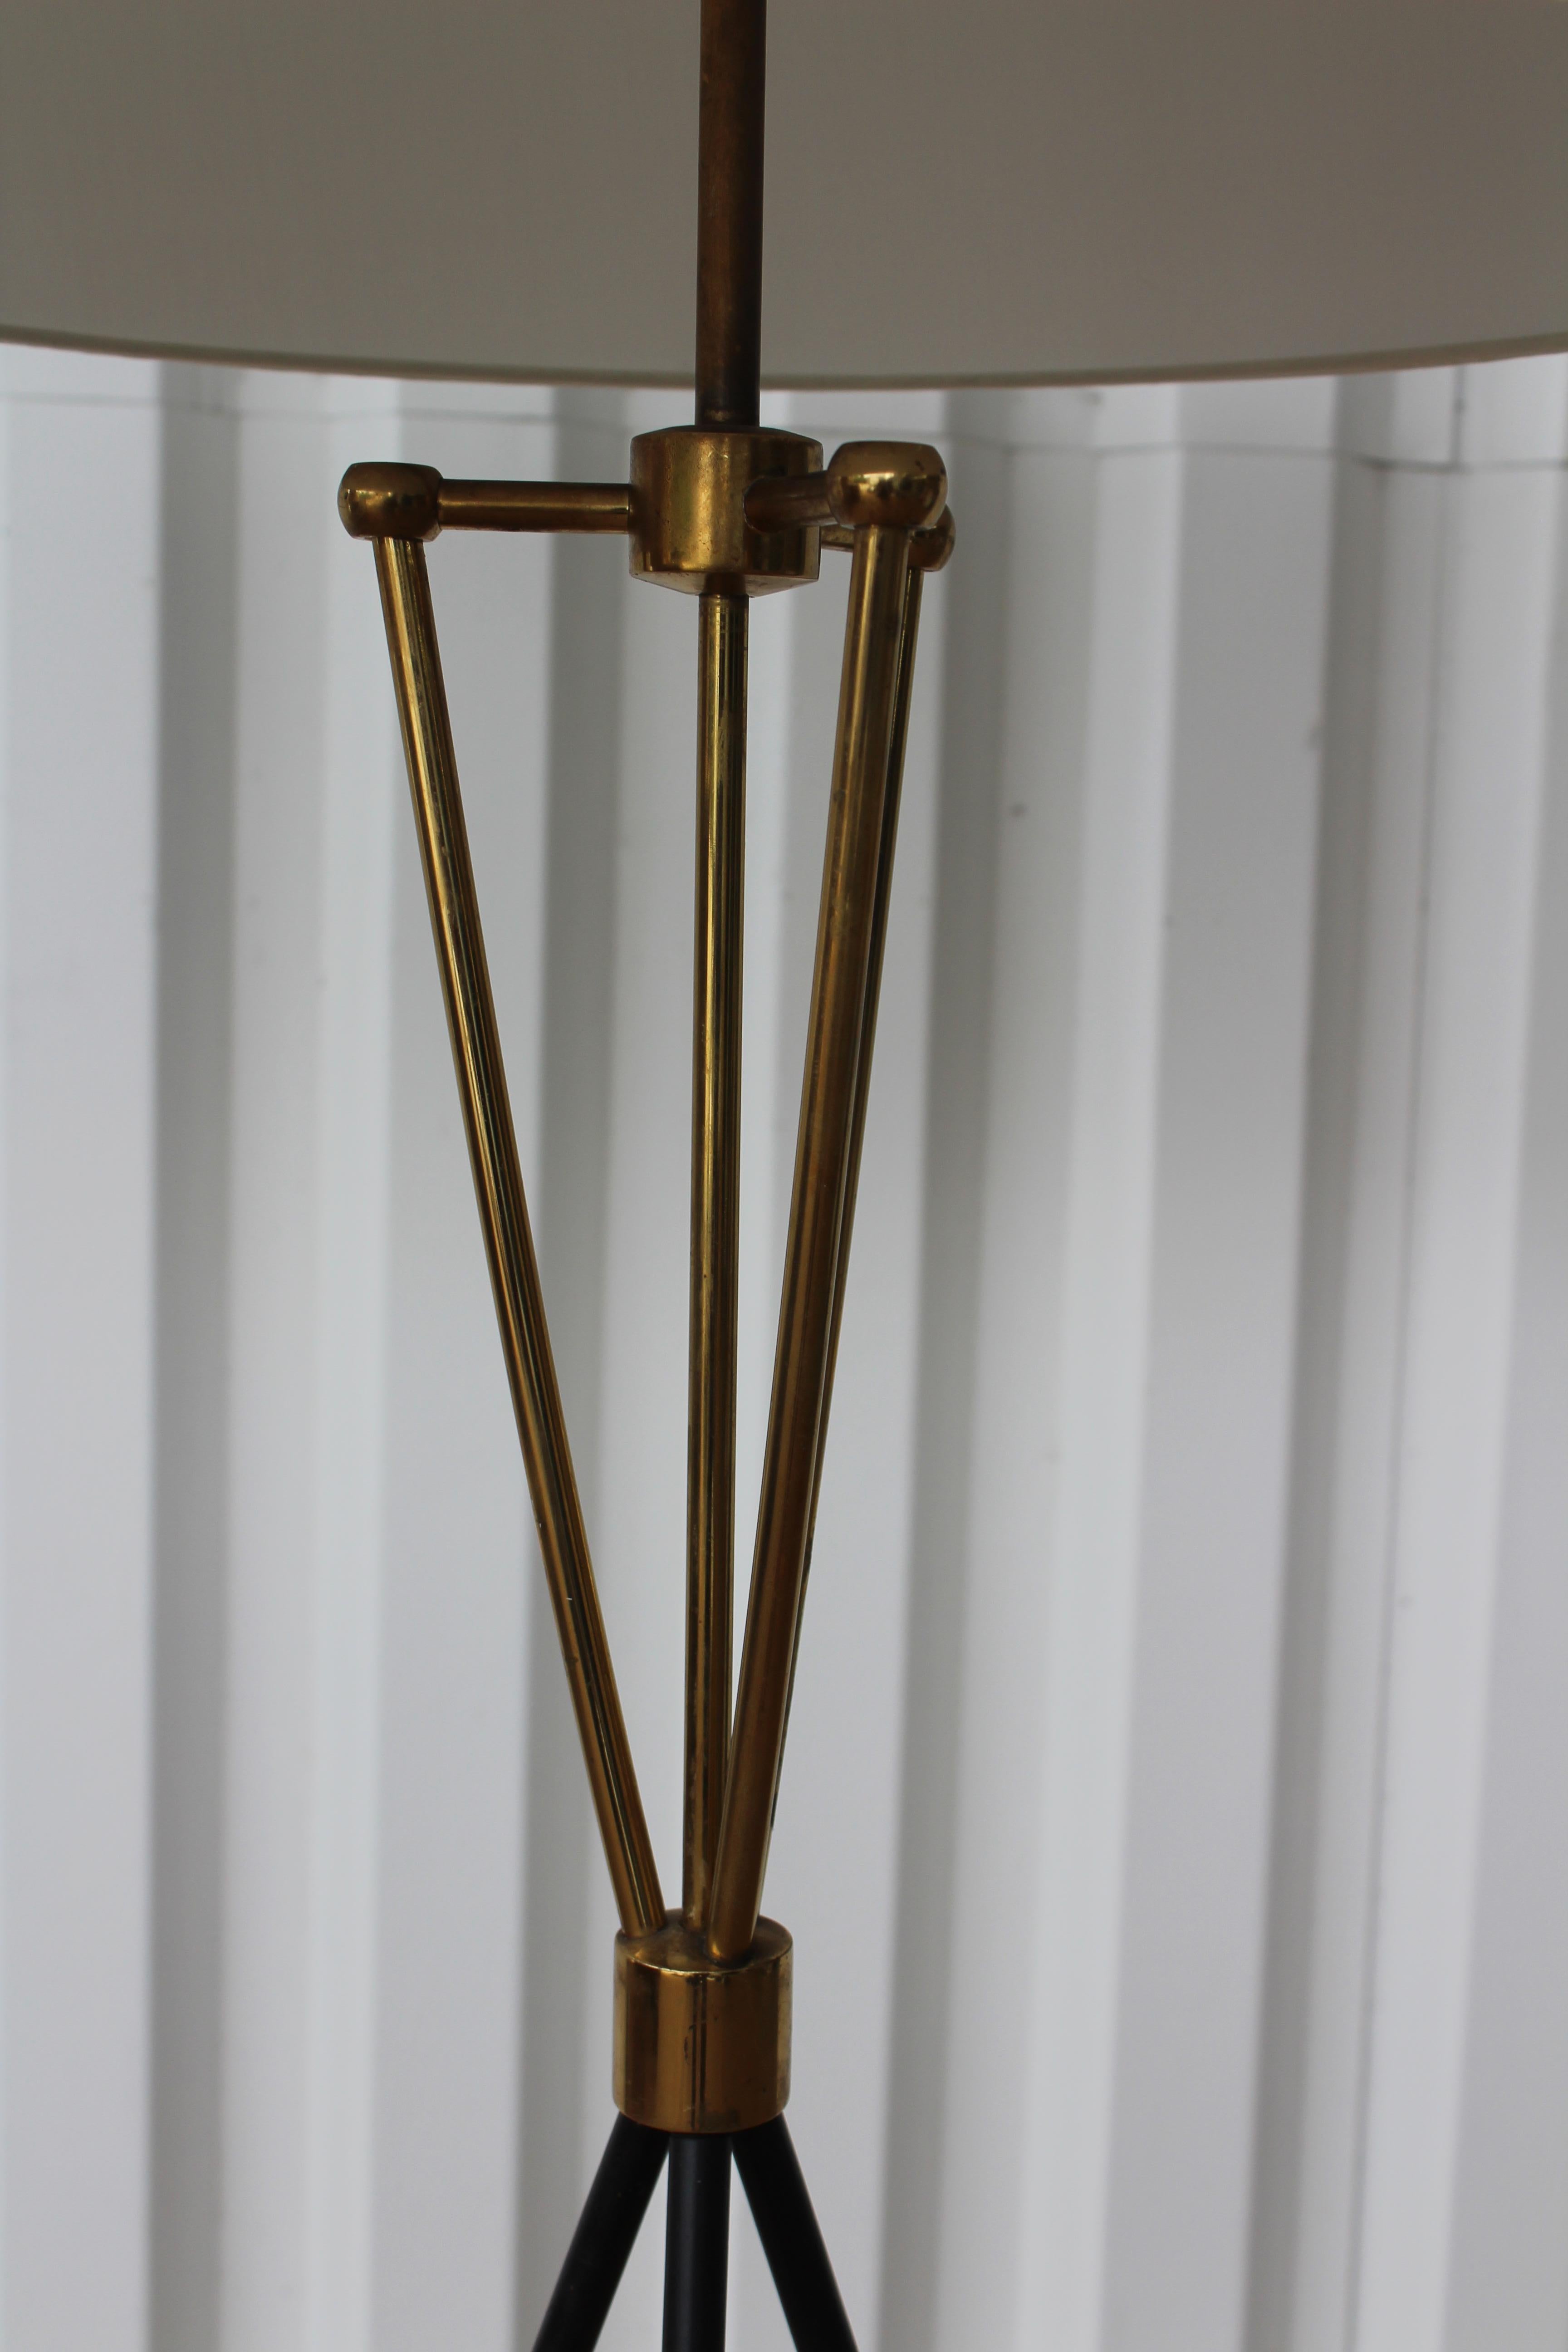 1950s modern brass floor lamp by T.H. Robsjohn-Gibbings. Newly rewired and fitted with a custom silk shade.